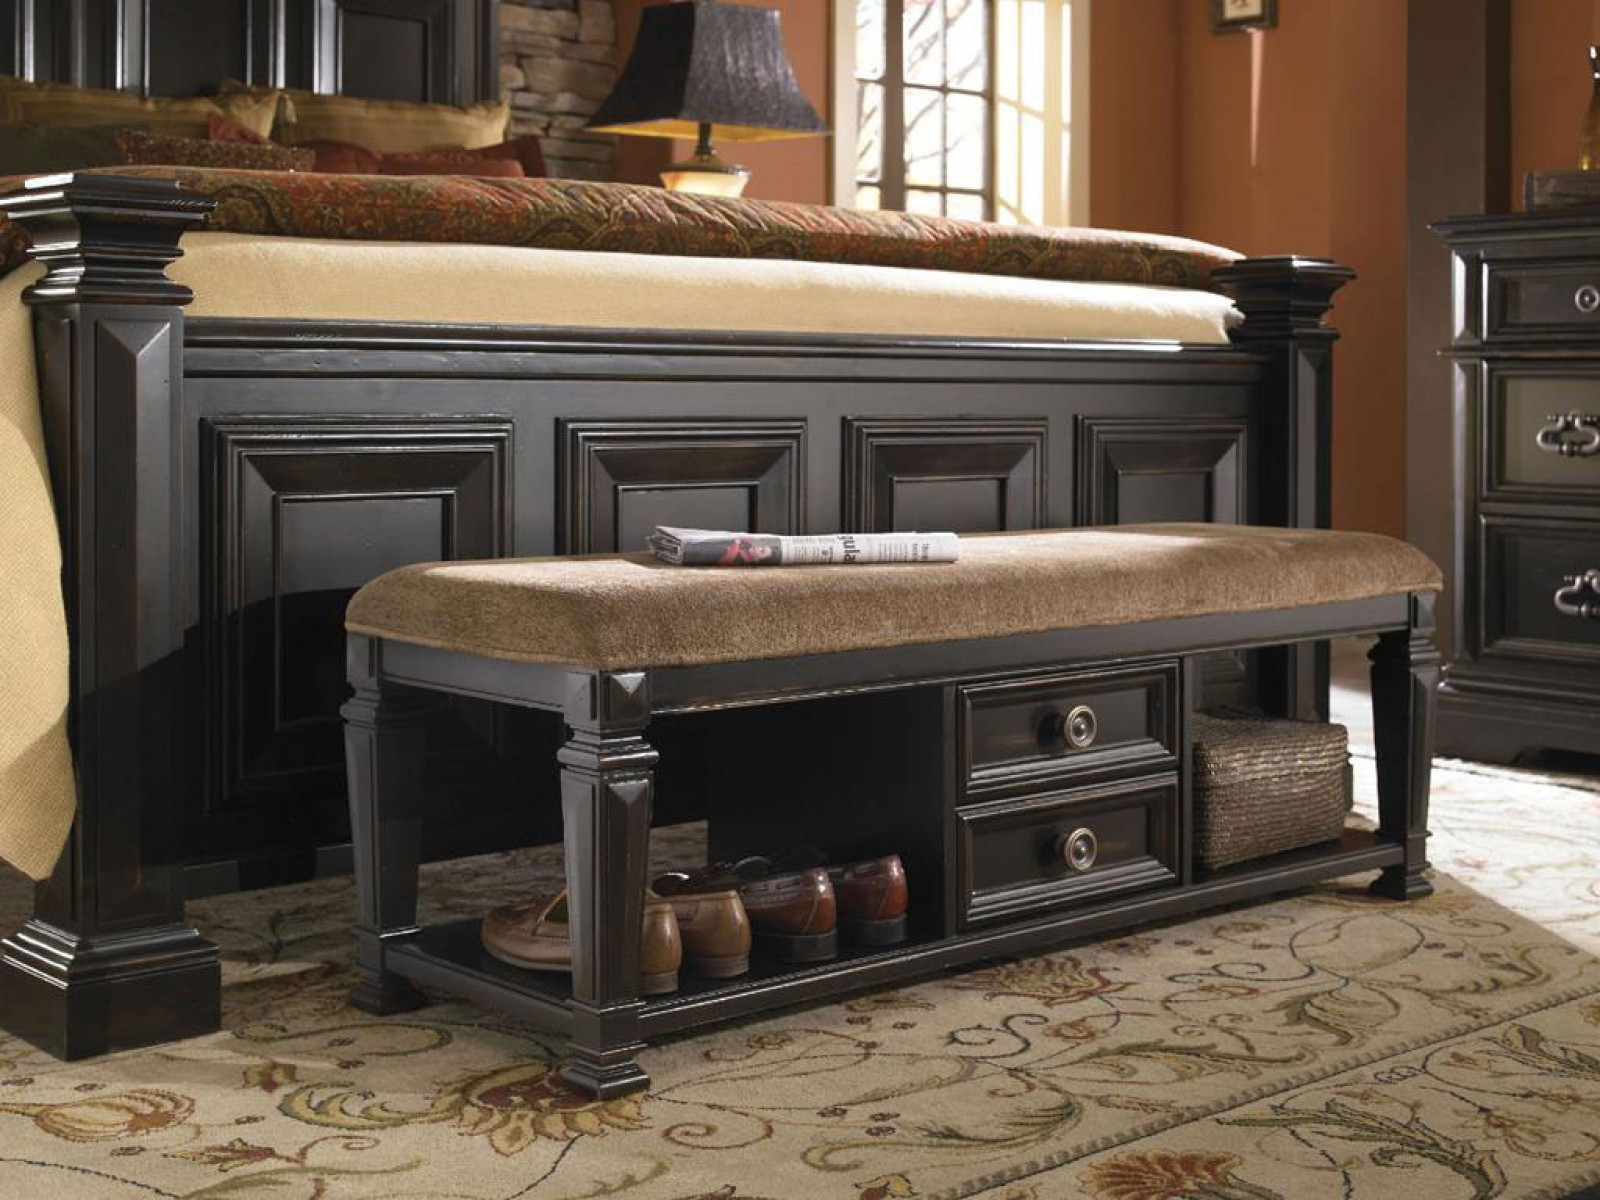 Bedroom Bench With Shoe Storage
 Add an Extra Seating or Storage to Your Bedroom with an